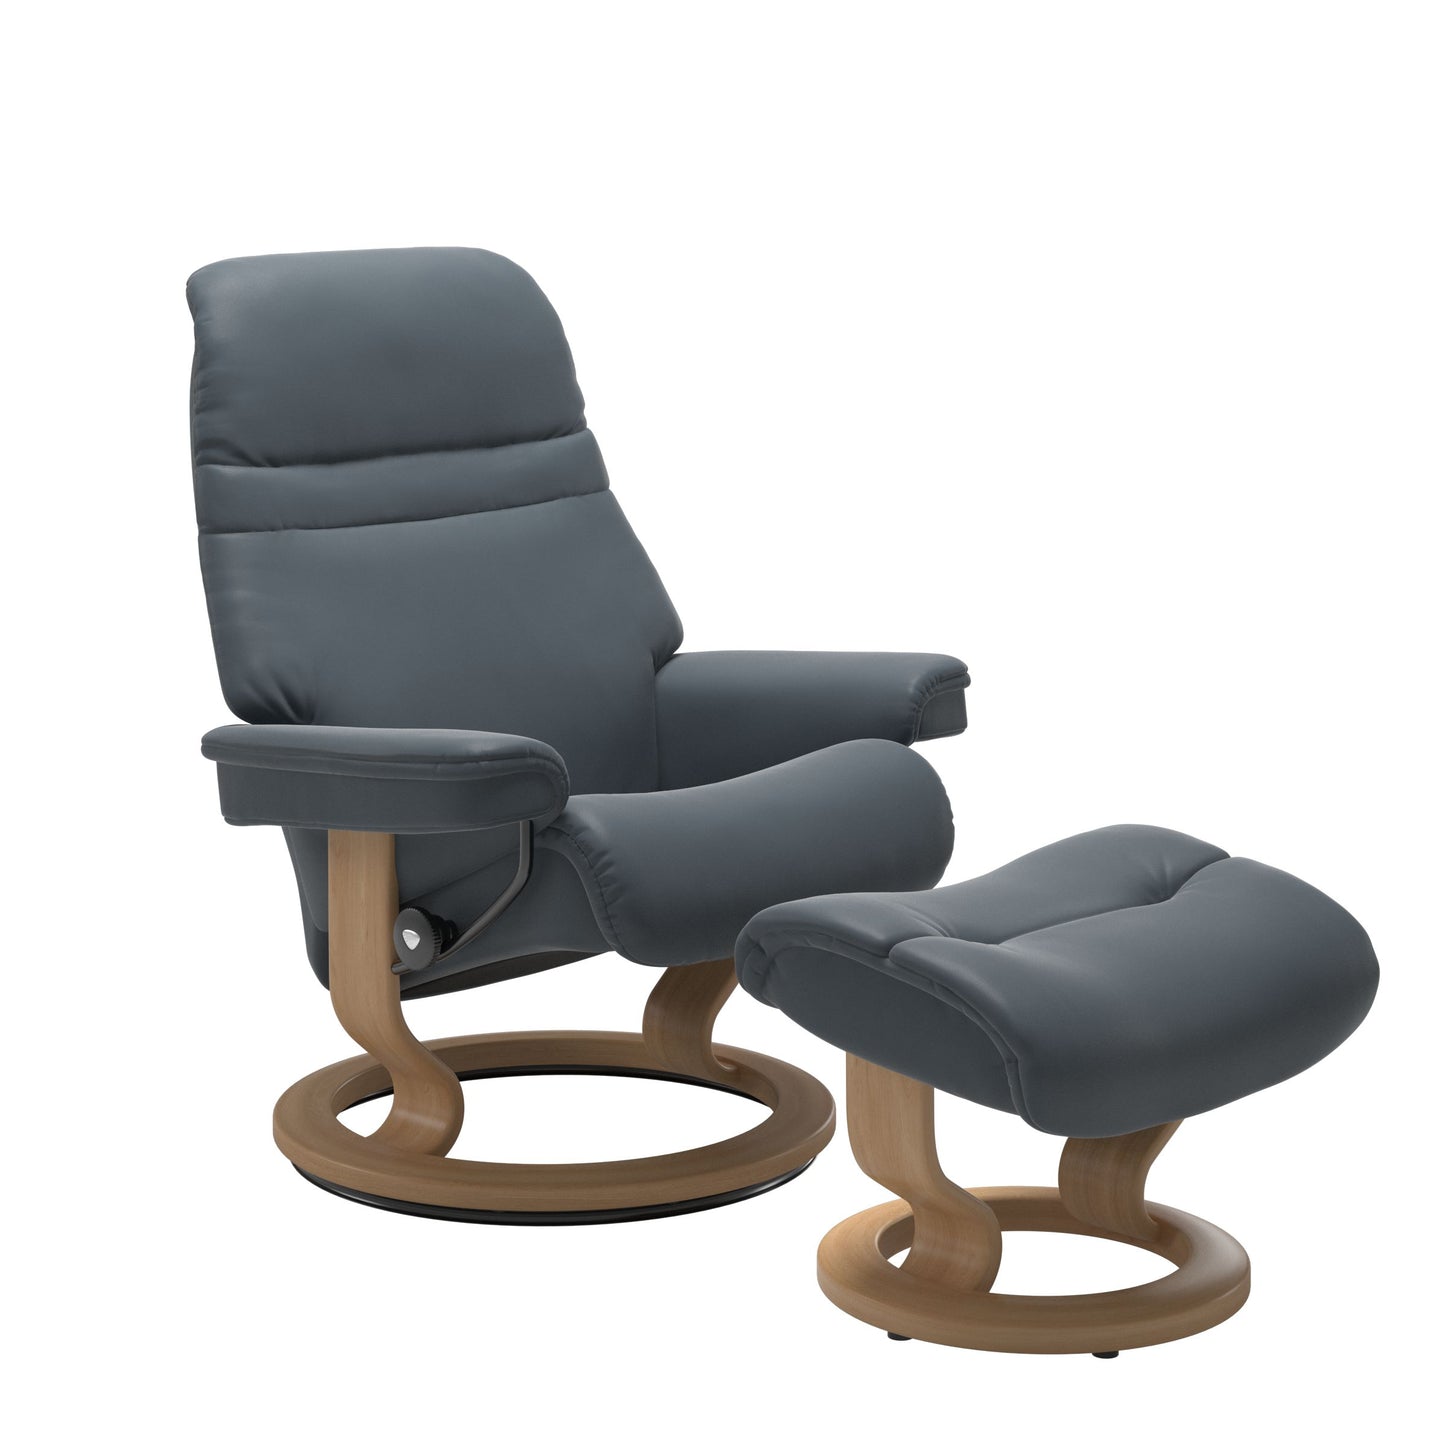 Sunrise Small Recliner Chair & Stool Classic Base by Stressless